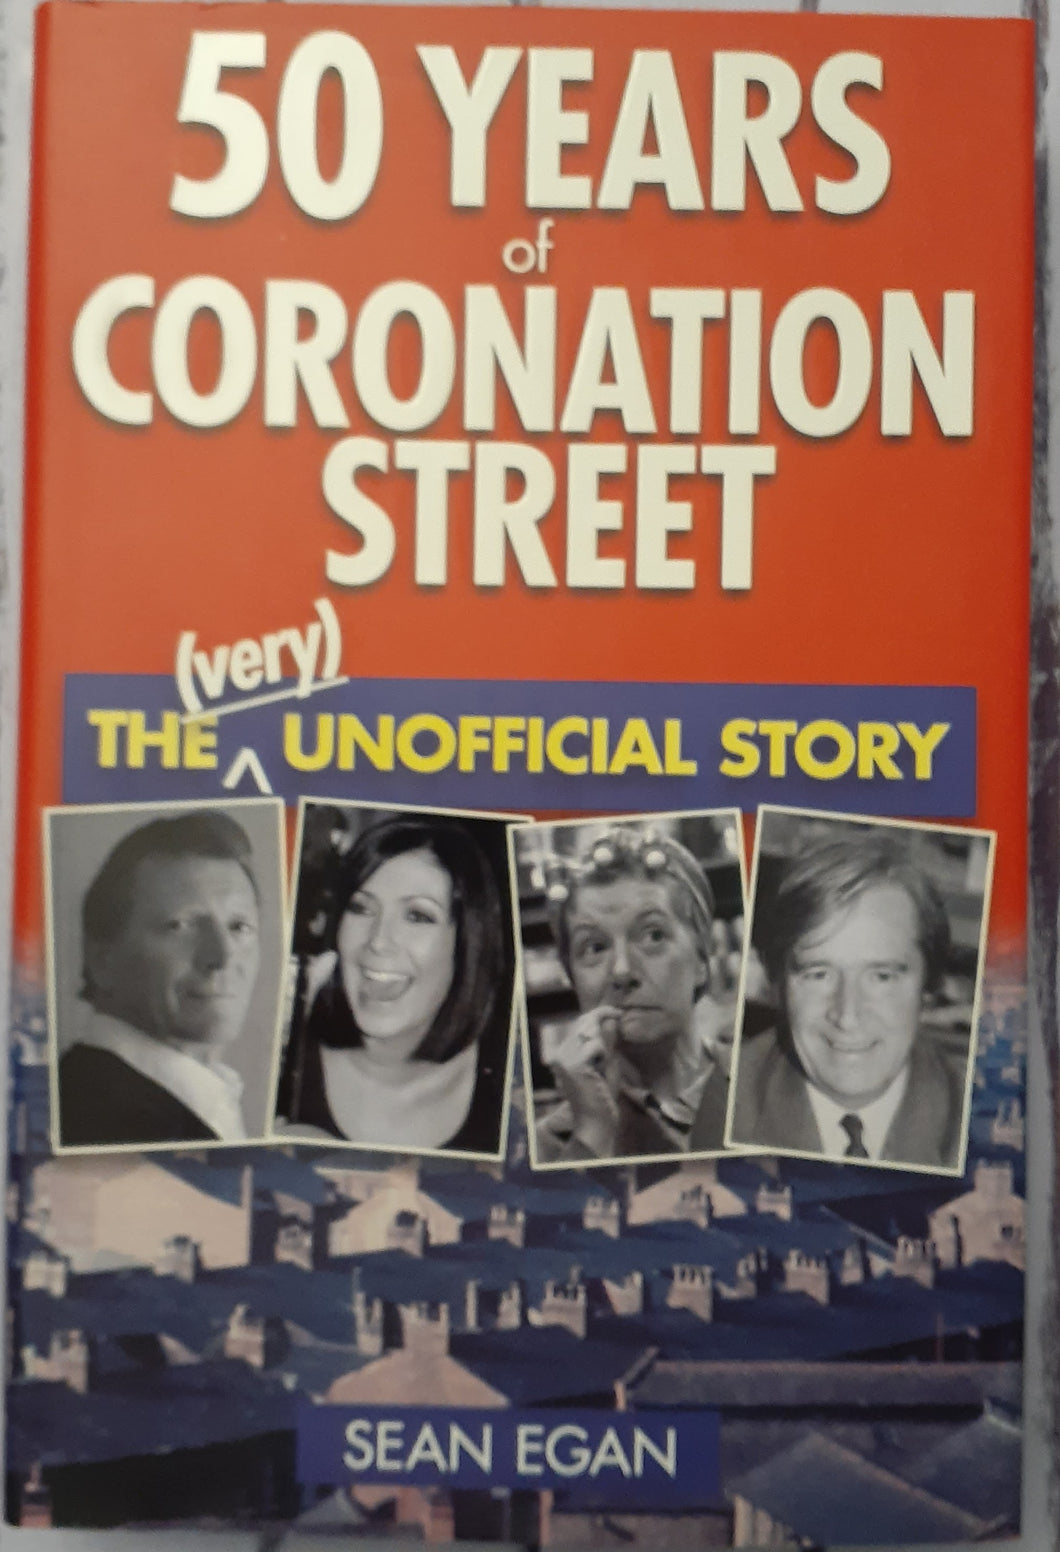 50 Years of Coronation Street: The (Very) Unofficial Story